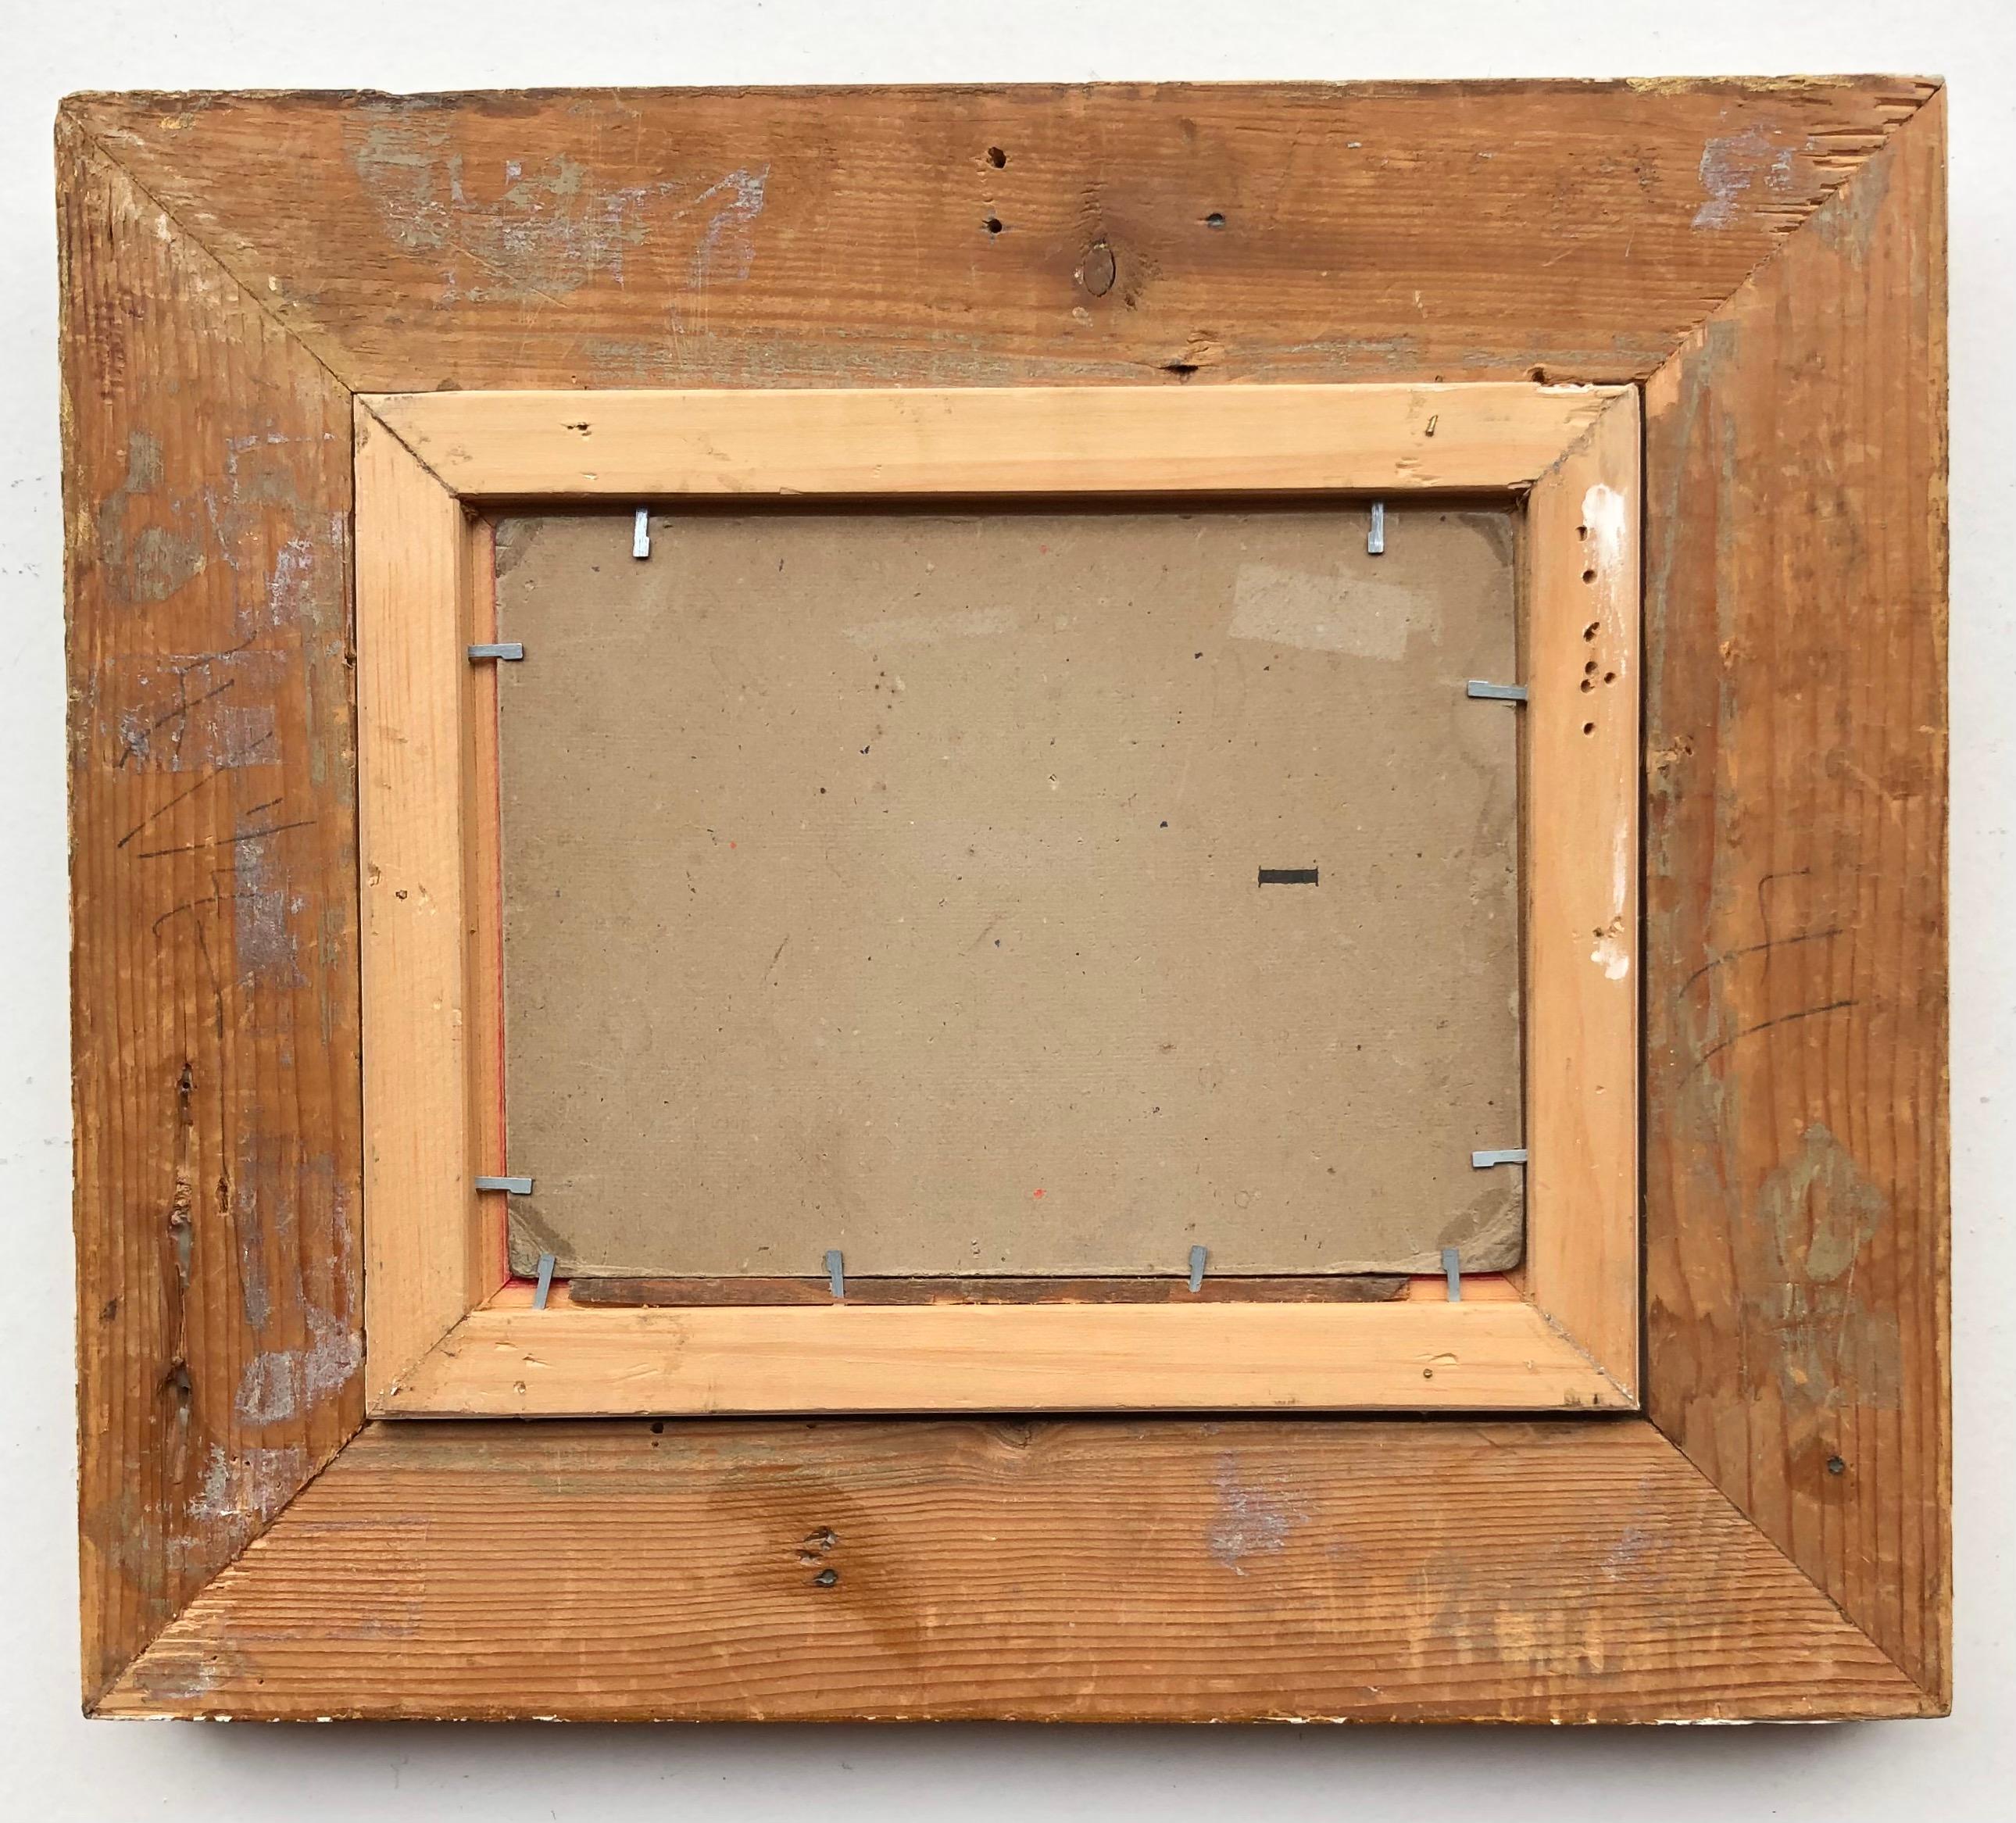 Work on cardboard
Plaster frame and gilded molded wood
34.5 x 40 x 4 cm